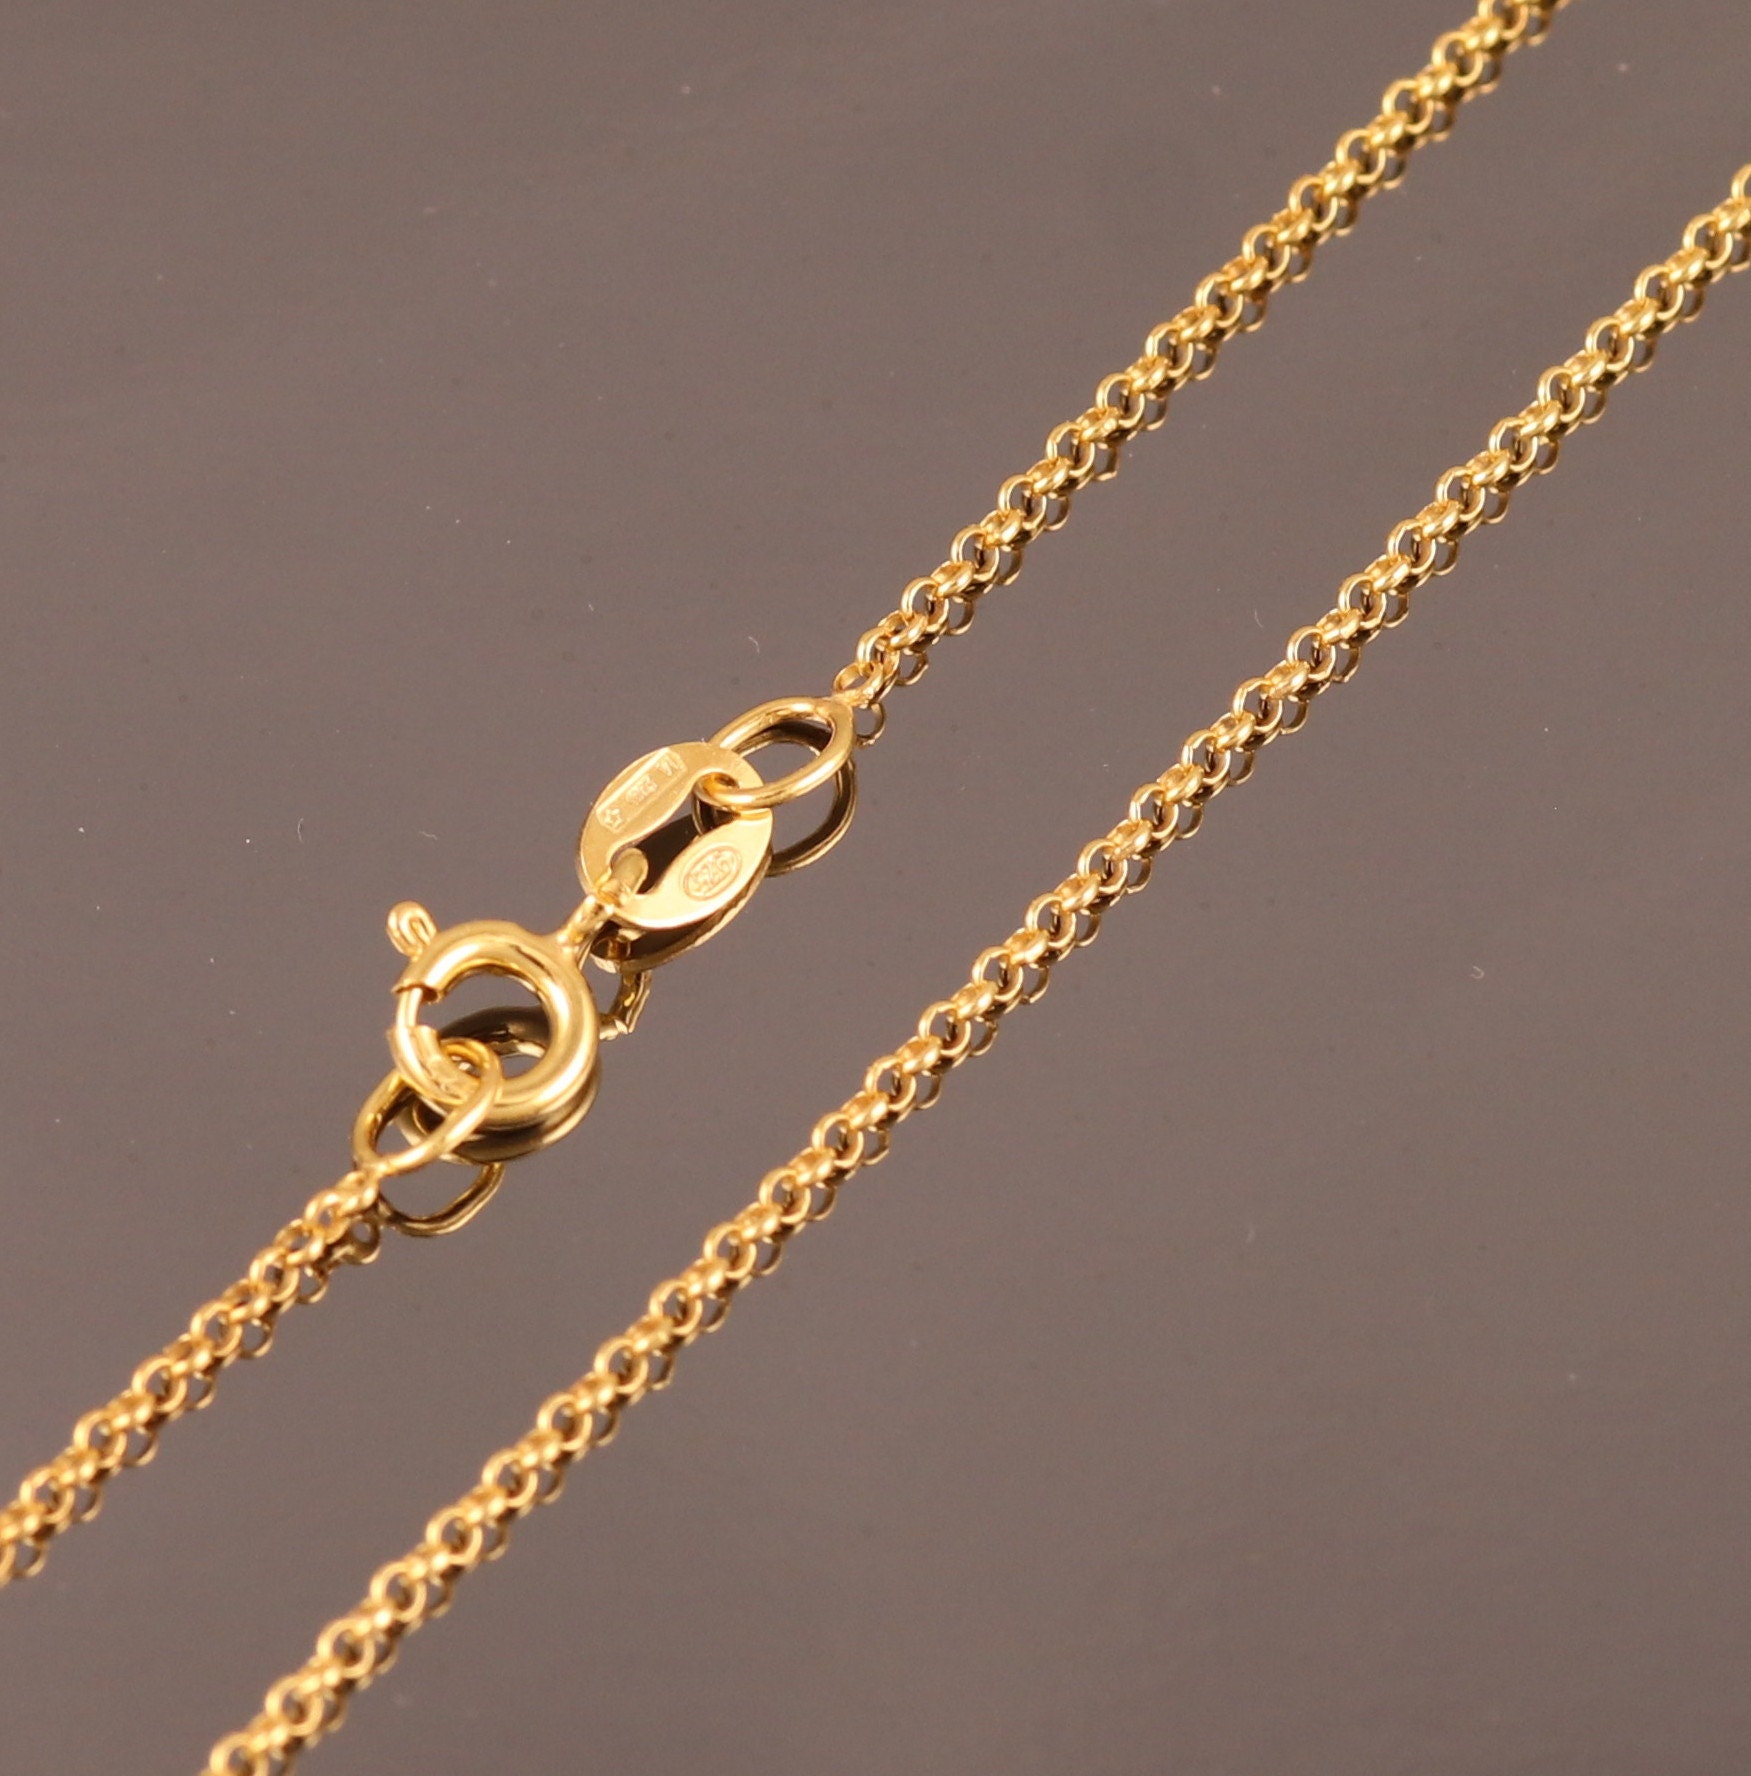 Gold Plated Sterling Silver Belcher Chain Necklace 16 18 20 22 Inches 